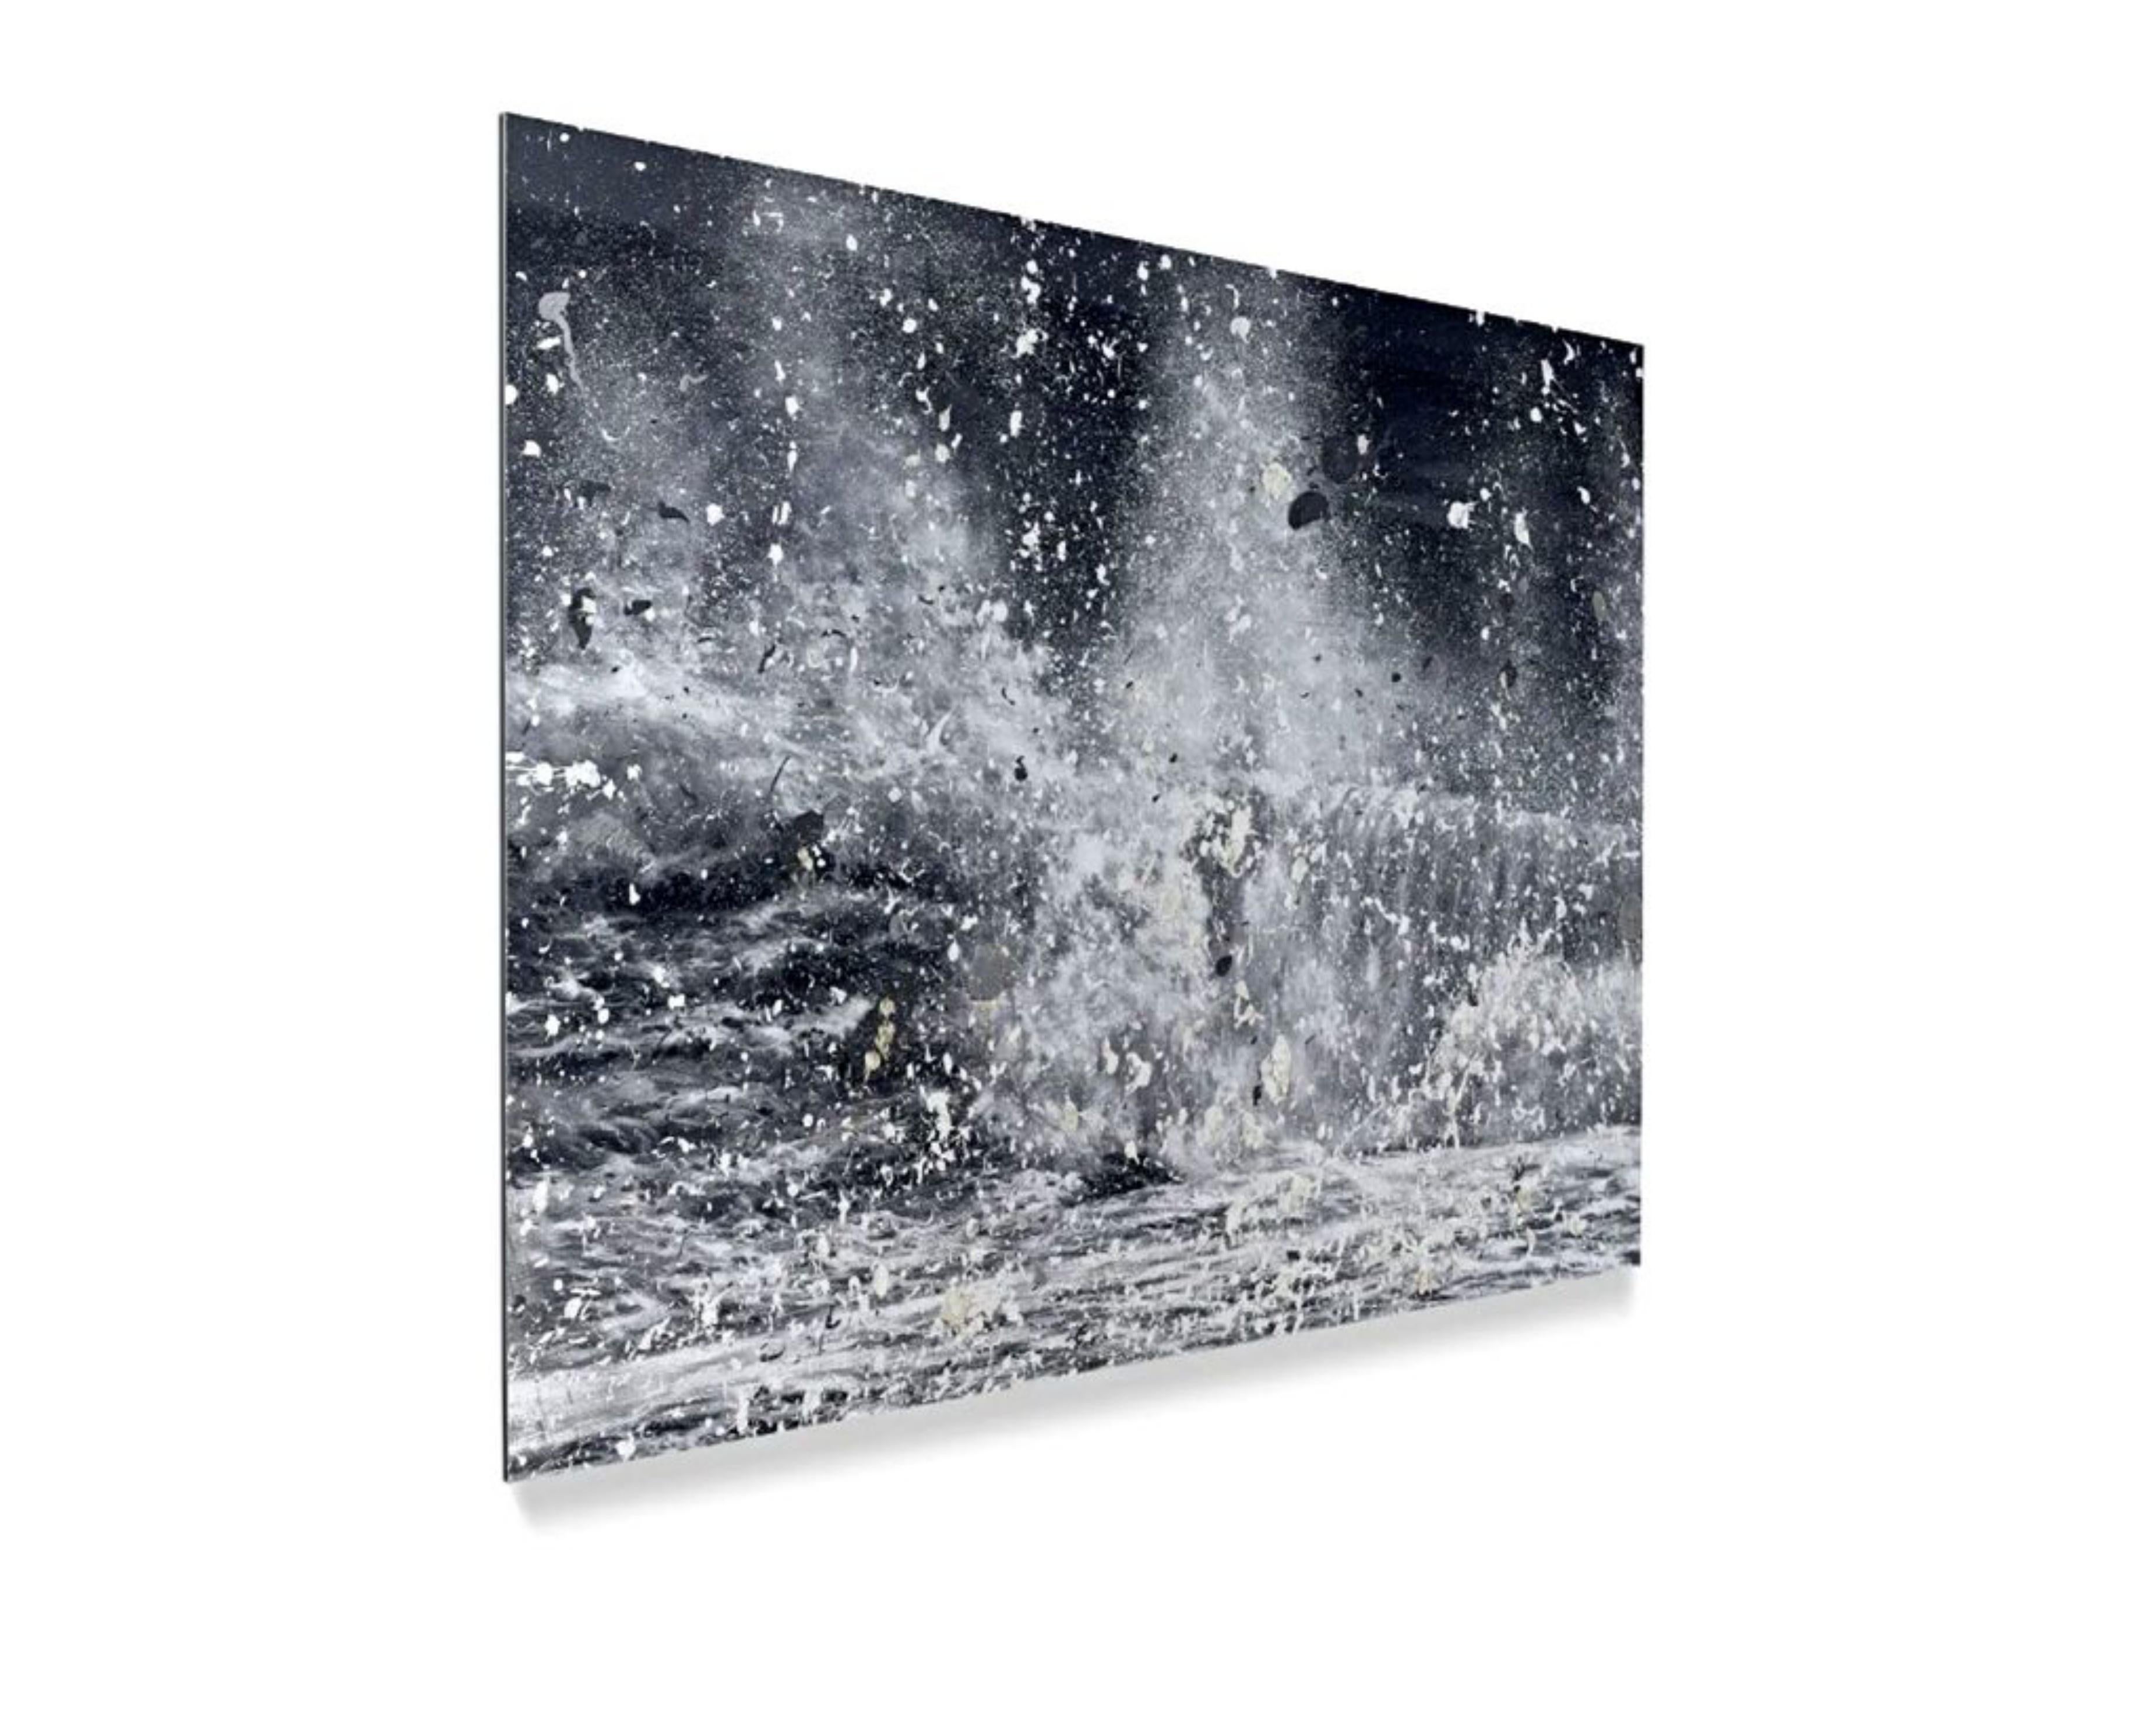 Damien Hirst
Blizzard (H13-10), from Where the Land Meets the Sea, 2023
Laminated Giclée print on aluminium composite panel
13 9/10 × 20 9/10 × 3/10 in  35.4 × 53.2 × 0.7 cm
Hand-signed on the label and numbered 278/500
Published by HENI, Inc. in